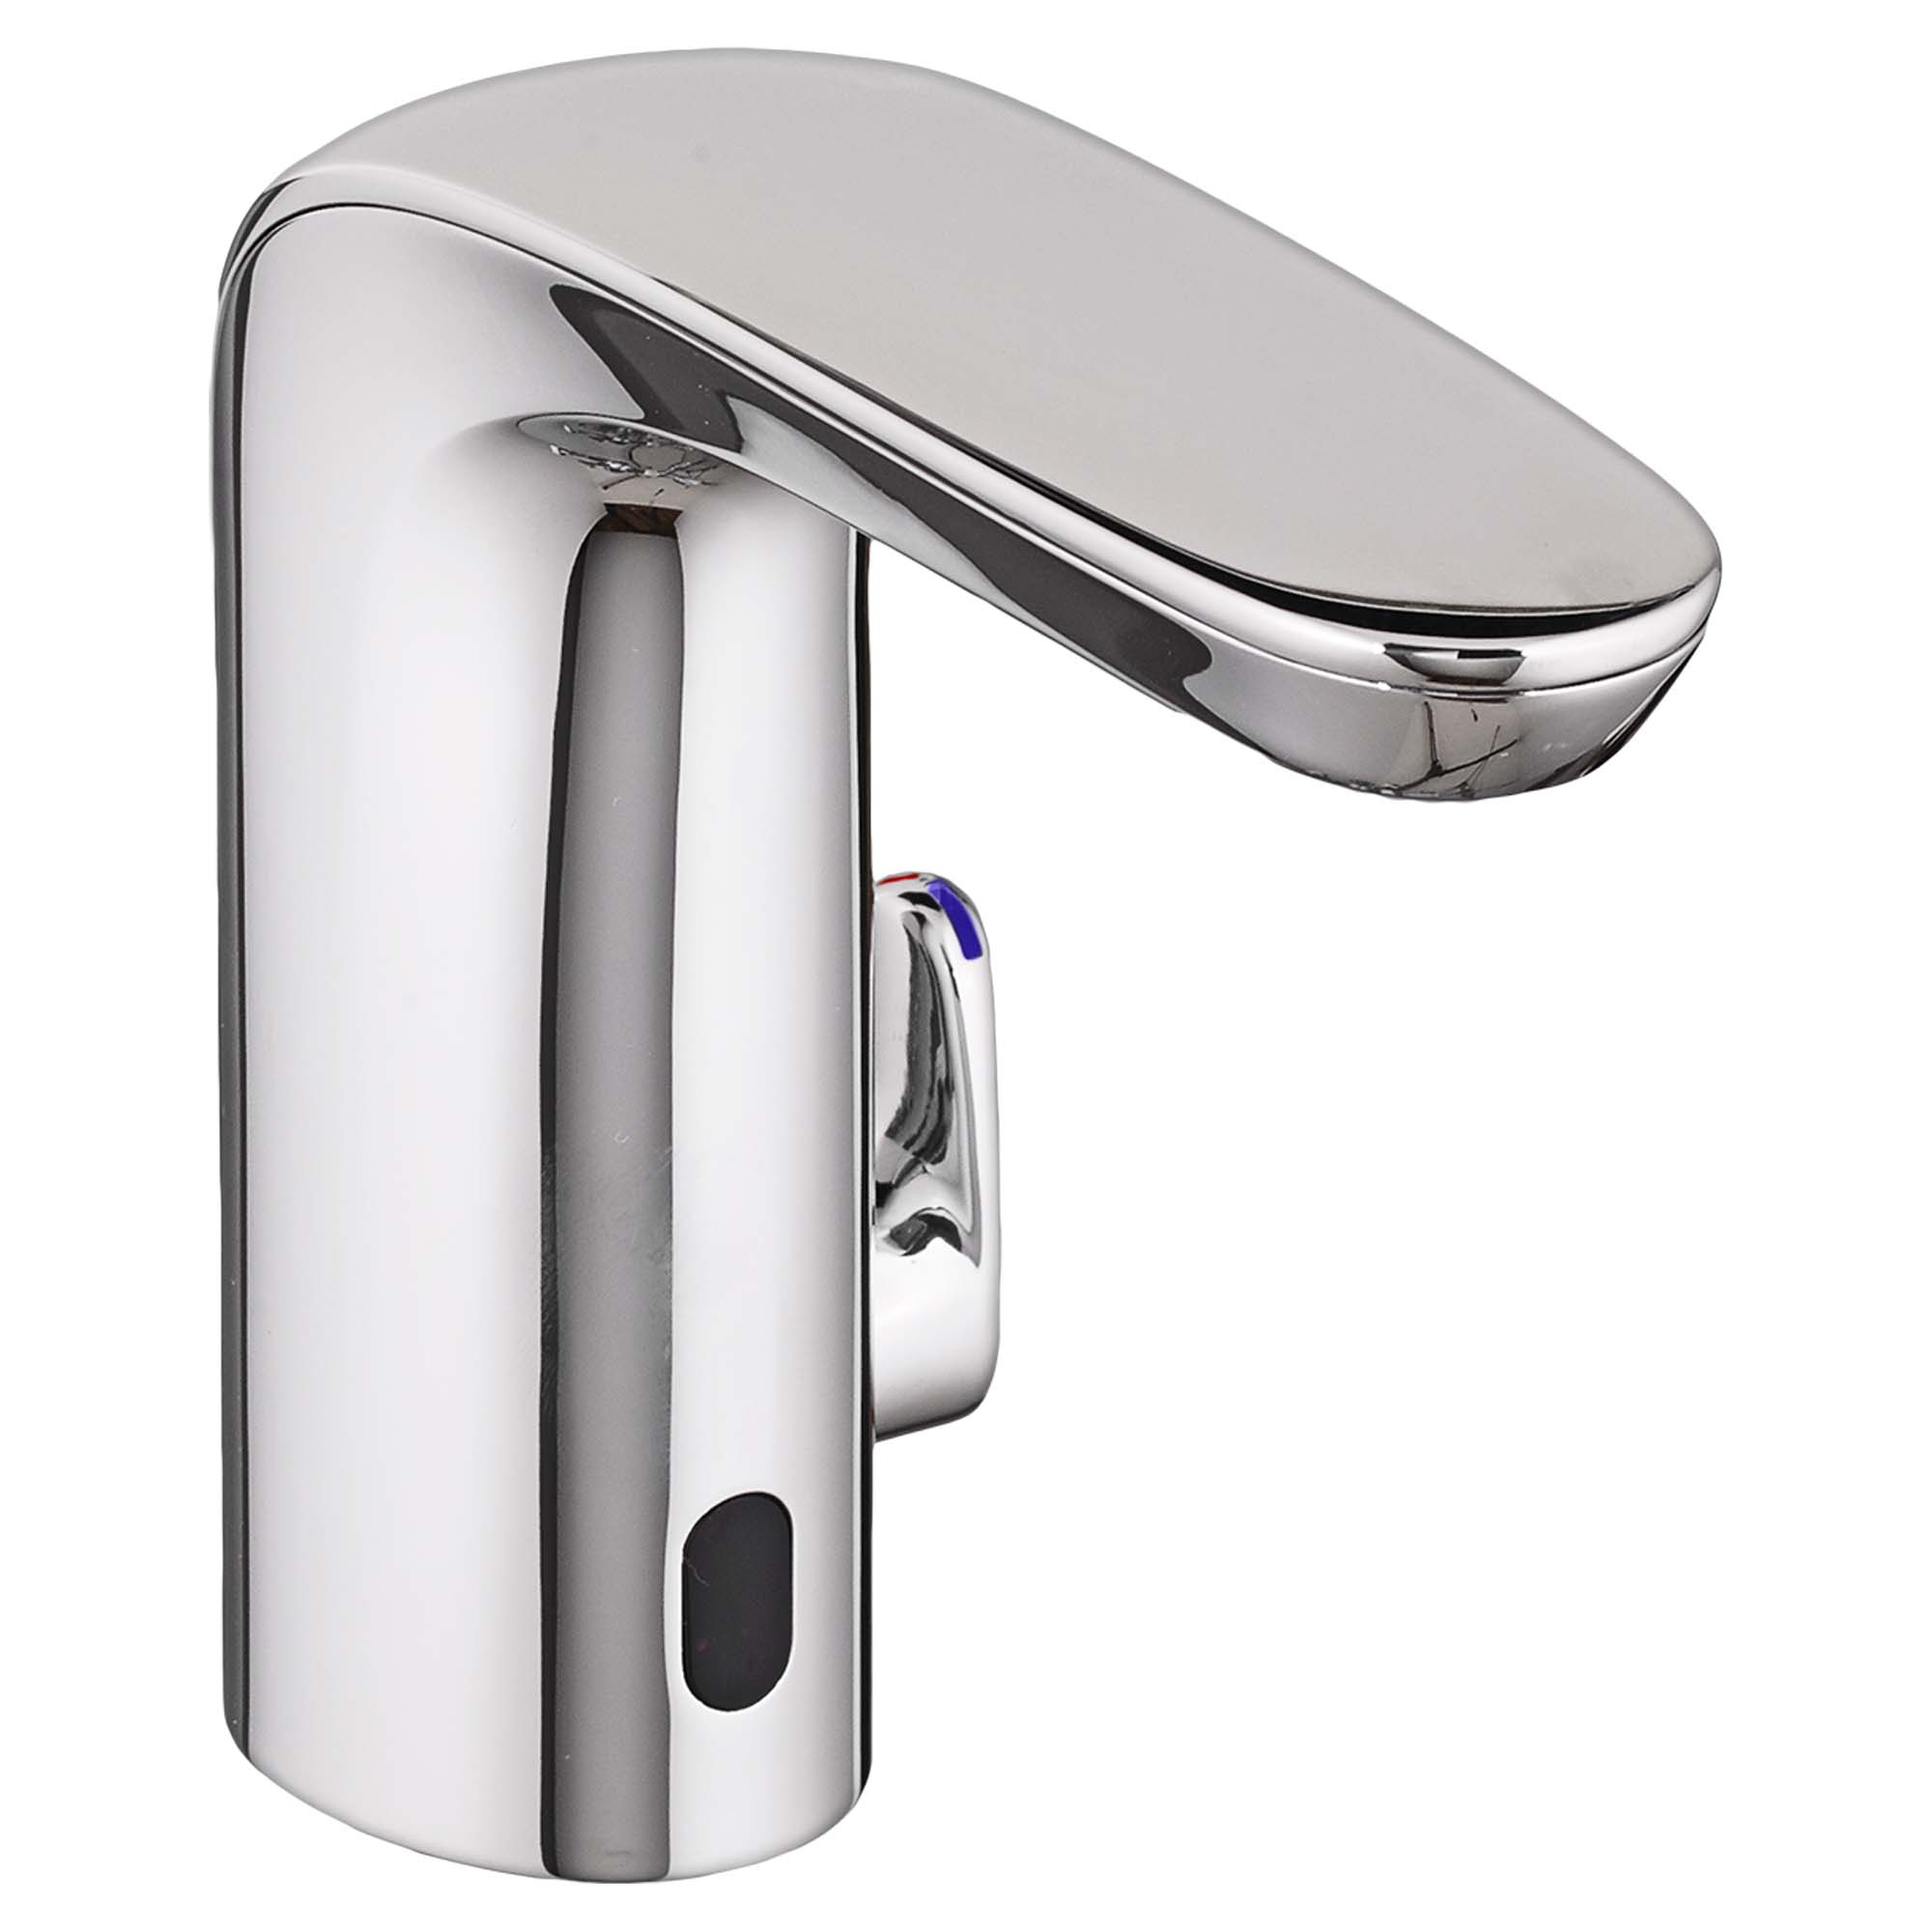 NextGen Selectronic™ Touchless Faucet, Battery-Powered With Above-Deck Mixing, 1.5 gpm/5.7 Lpm